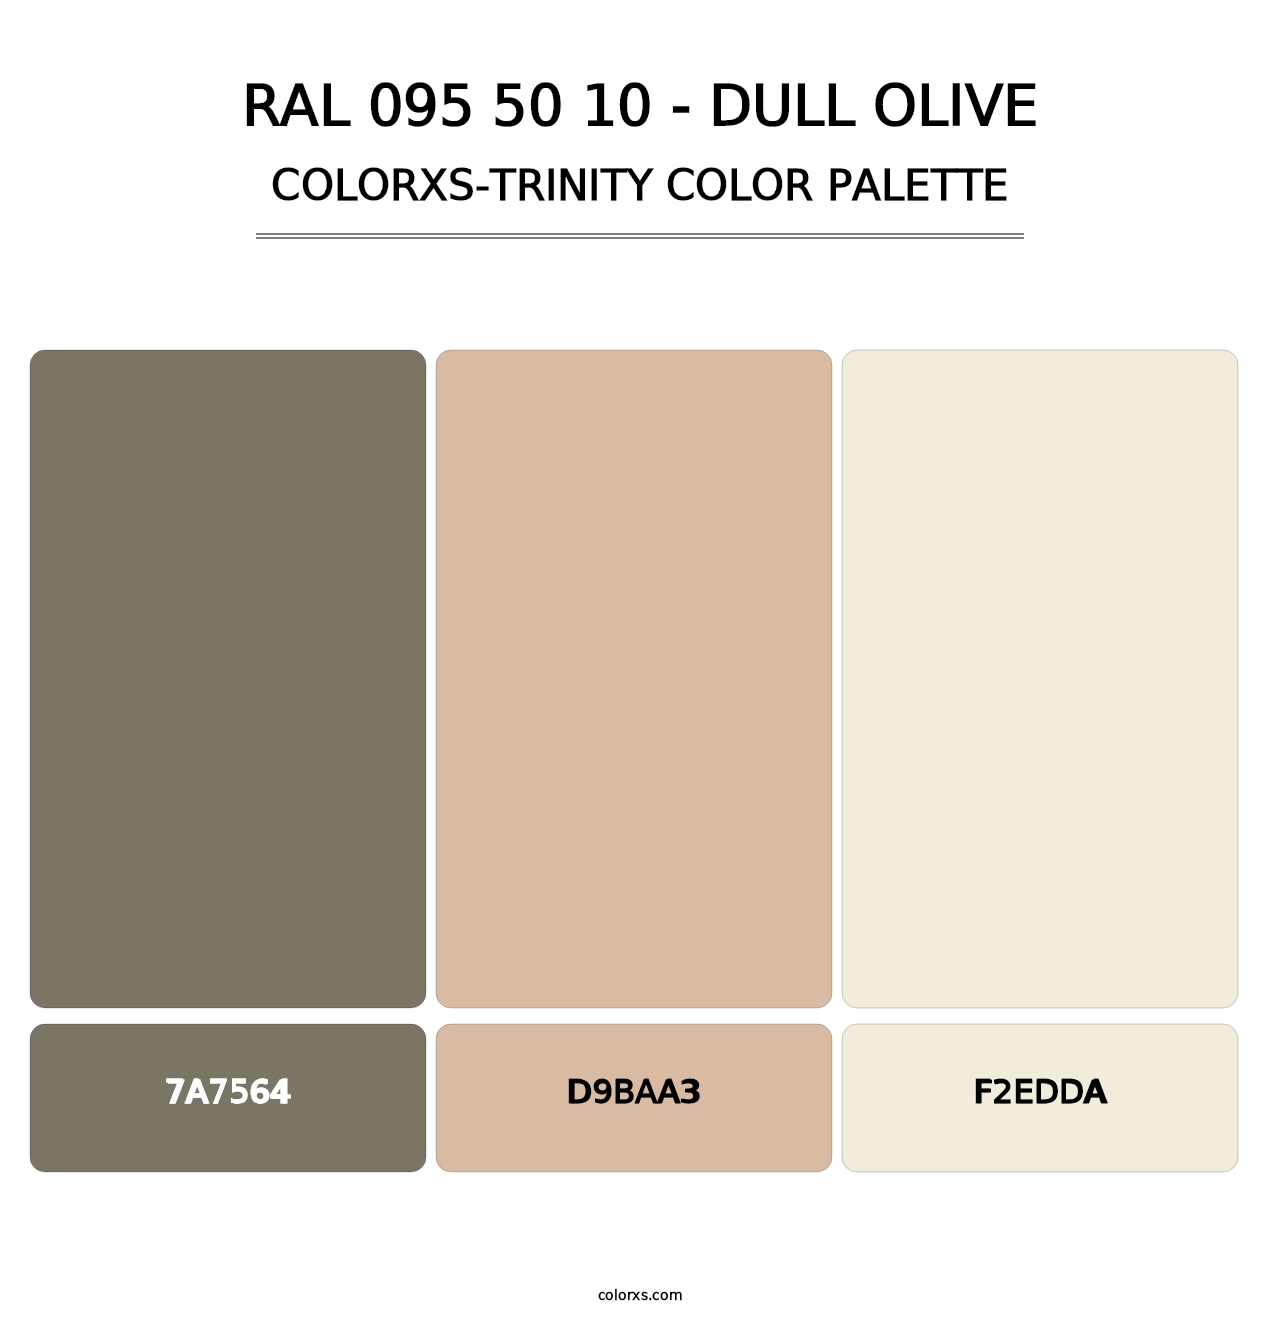 RAL 095 50 10 - Dull Olive - Colorxs Trinity Palette